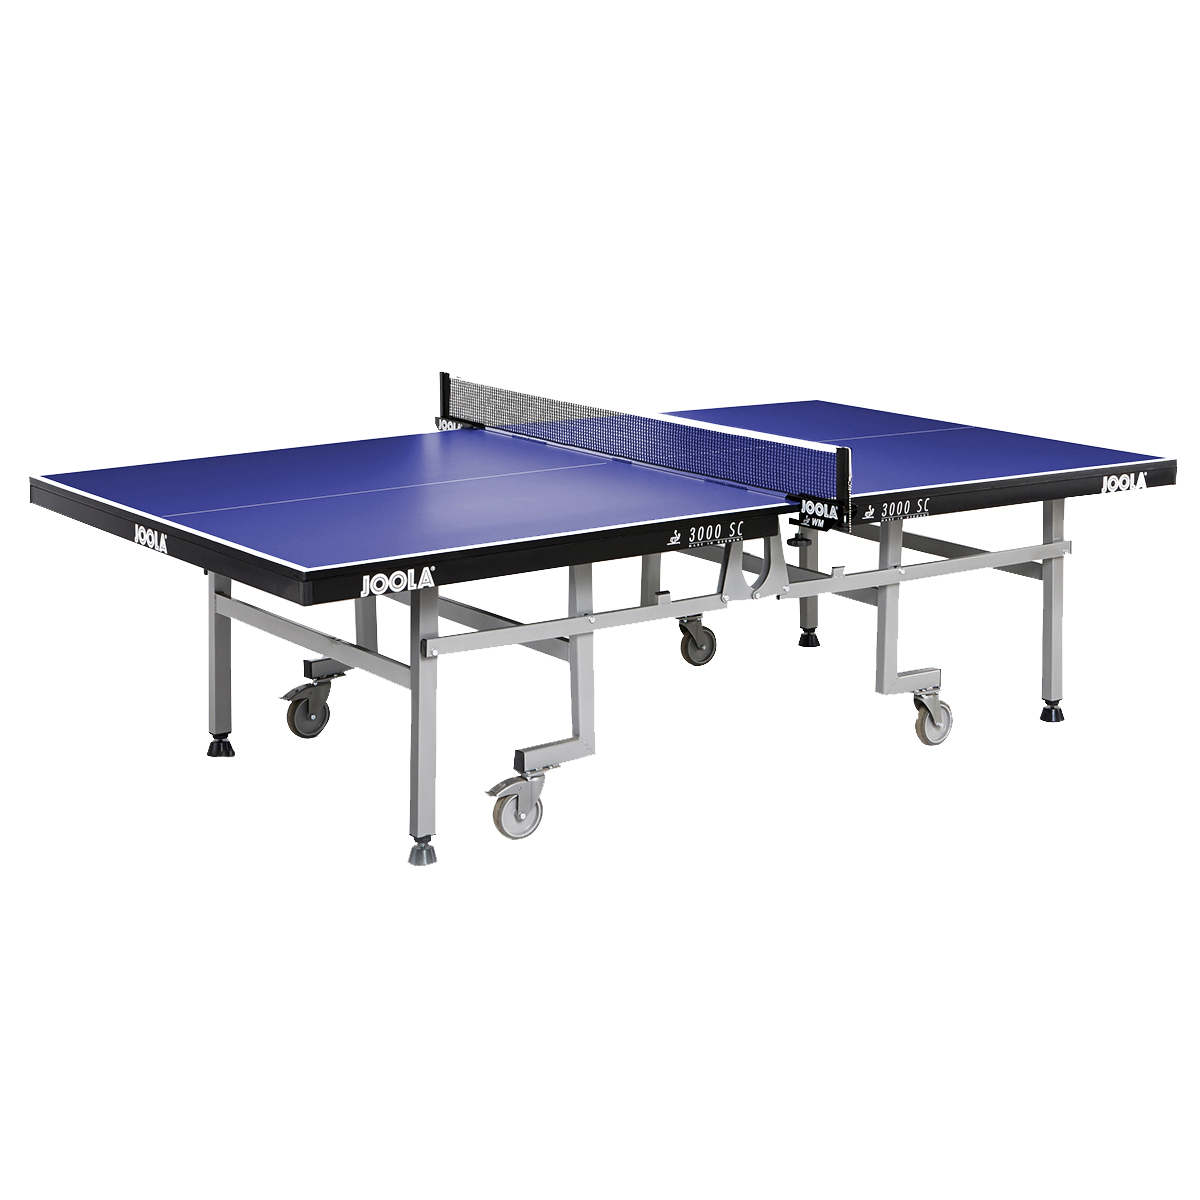 JOOLA 3000 SC PROFESSIONAL TABLE TENNIS TABLE WITH WM NET AND POST SET